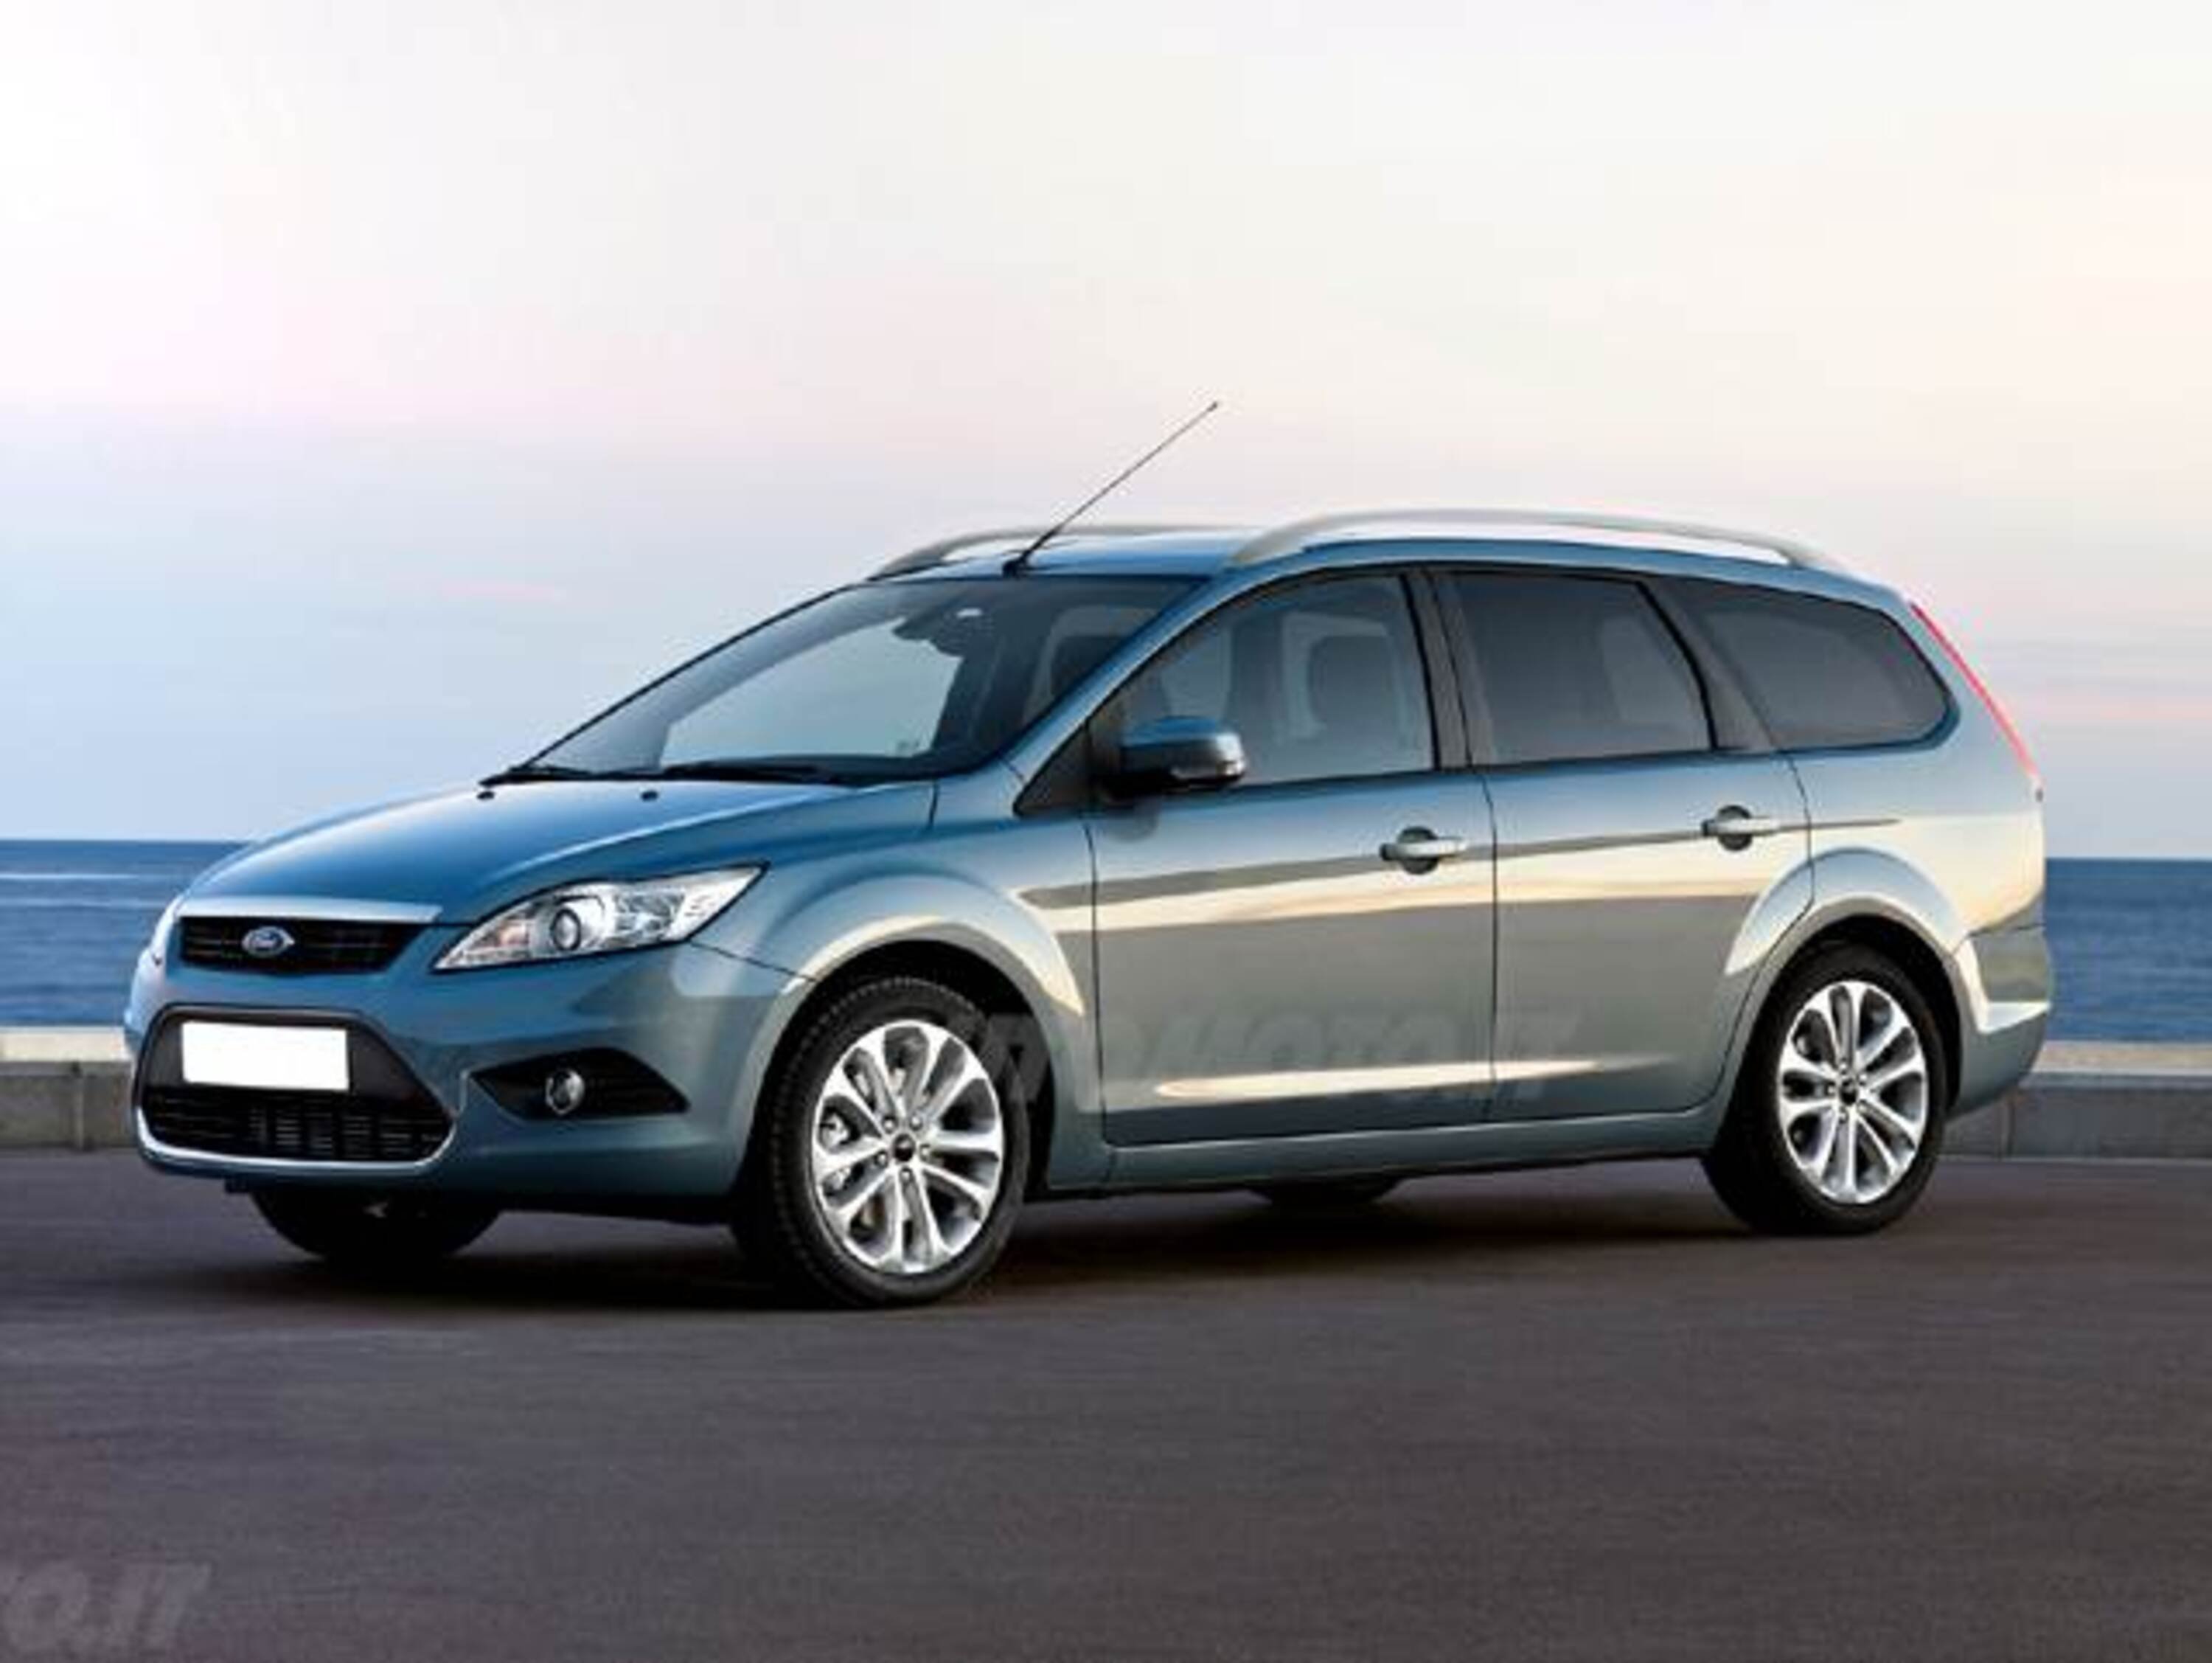 Ford Focus Station Wagon 1.6 Ti-VCT (115CV) SW Tit.